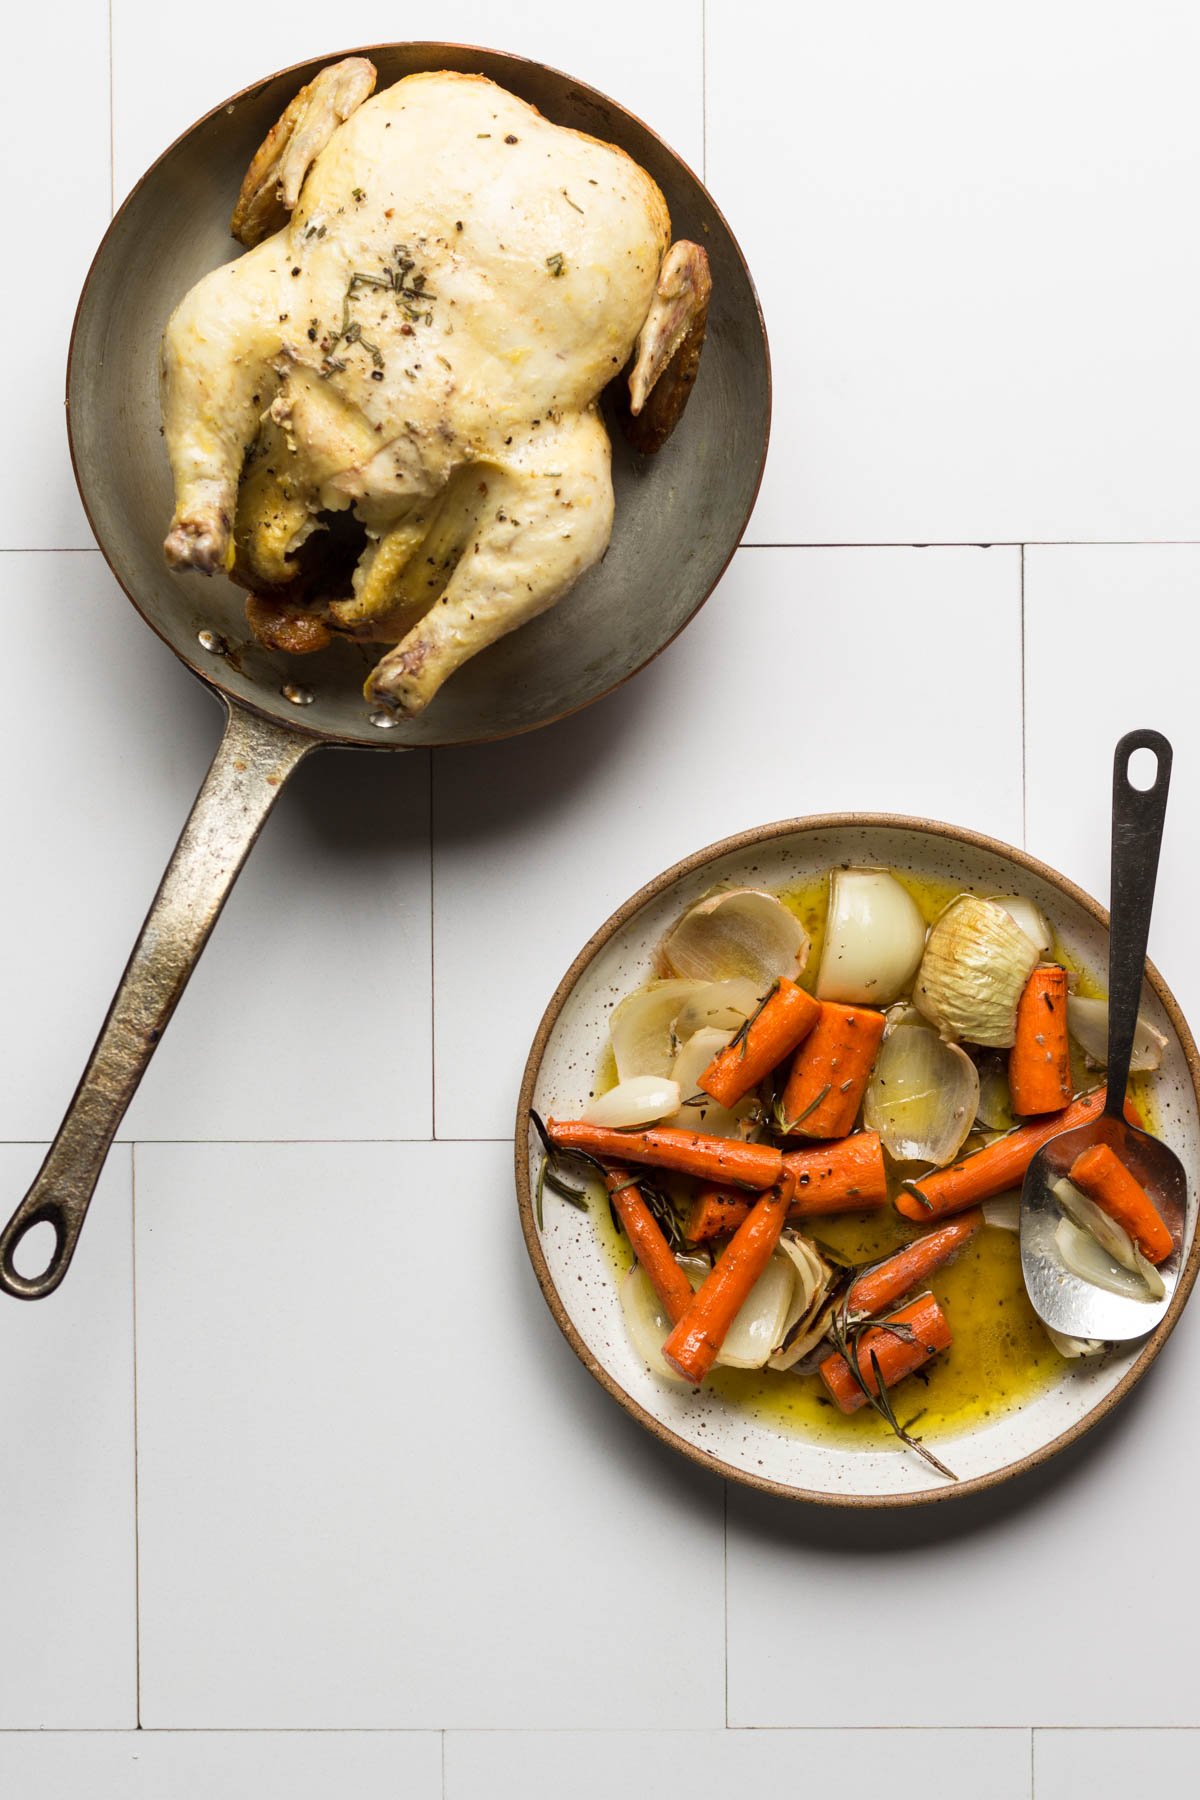 Vegetables on a plate and chicken in a saute pan